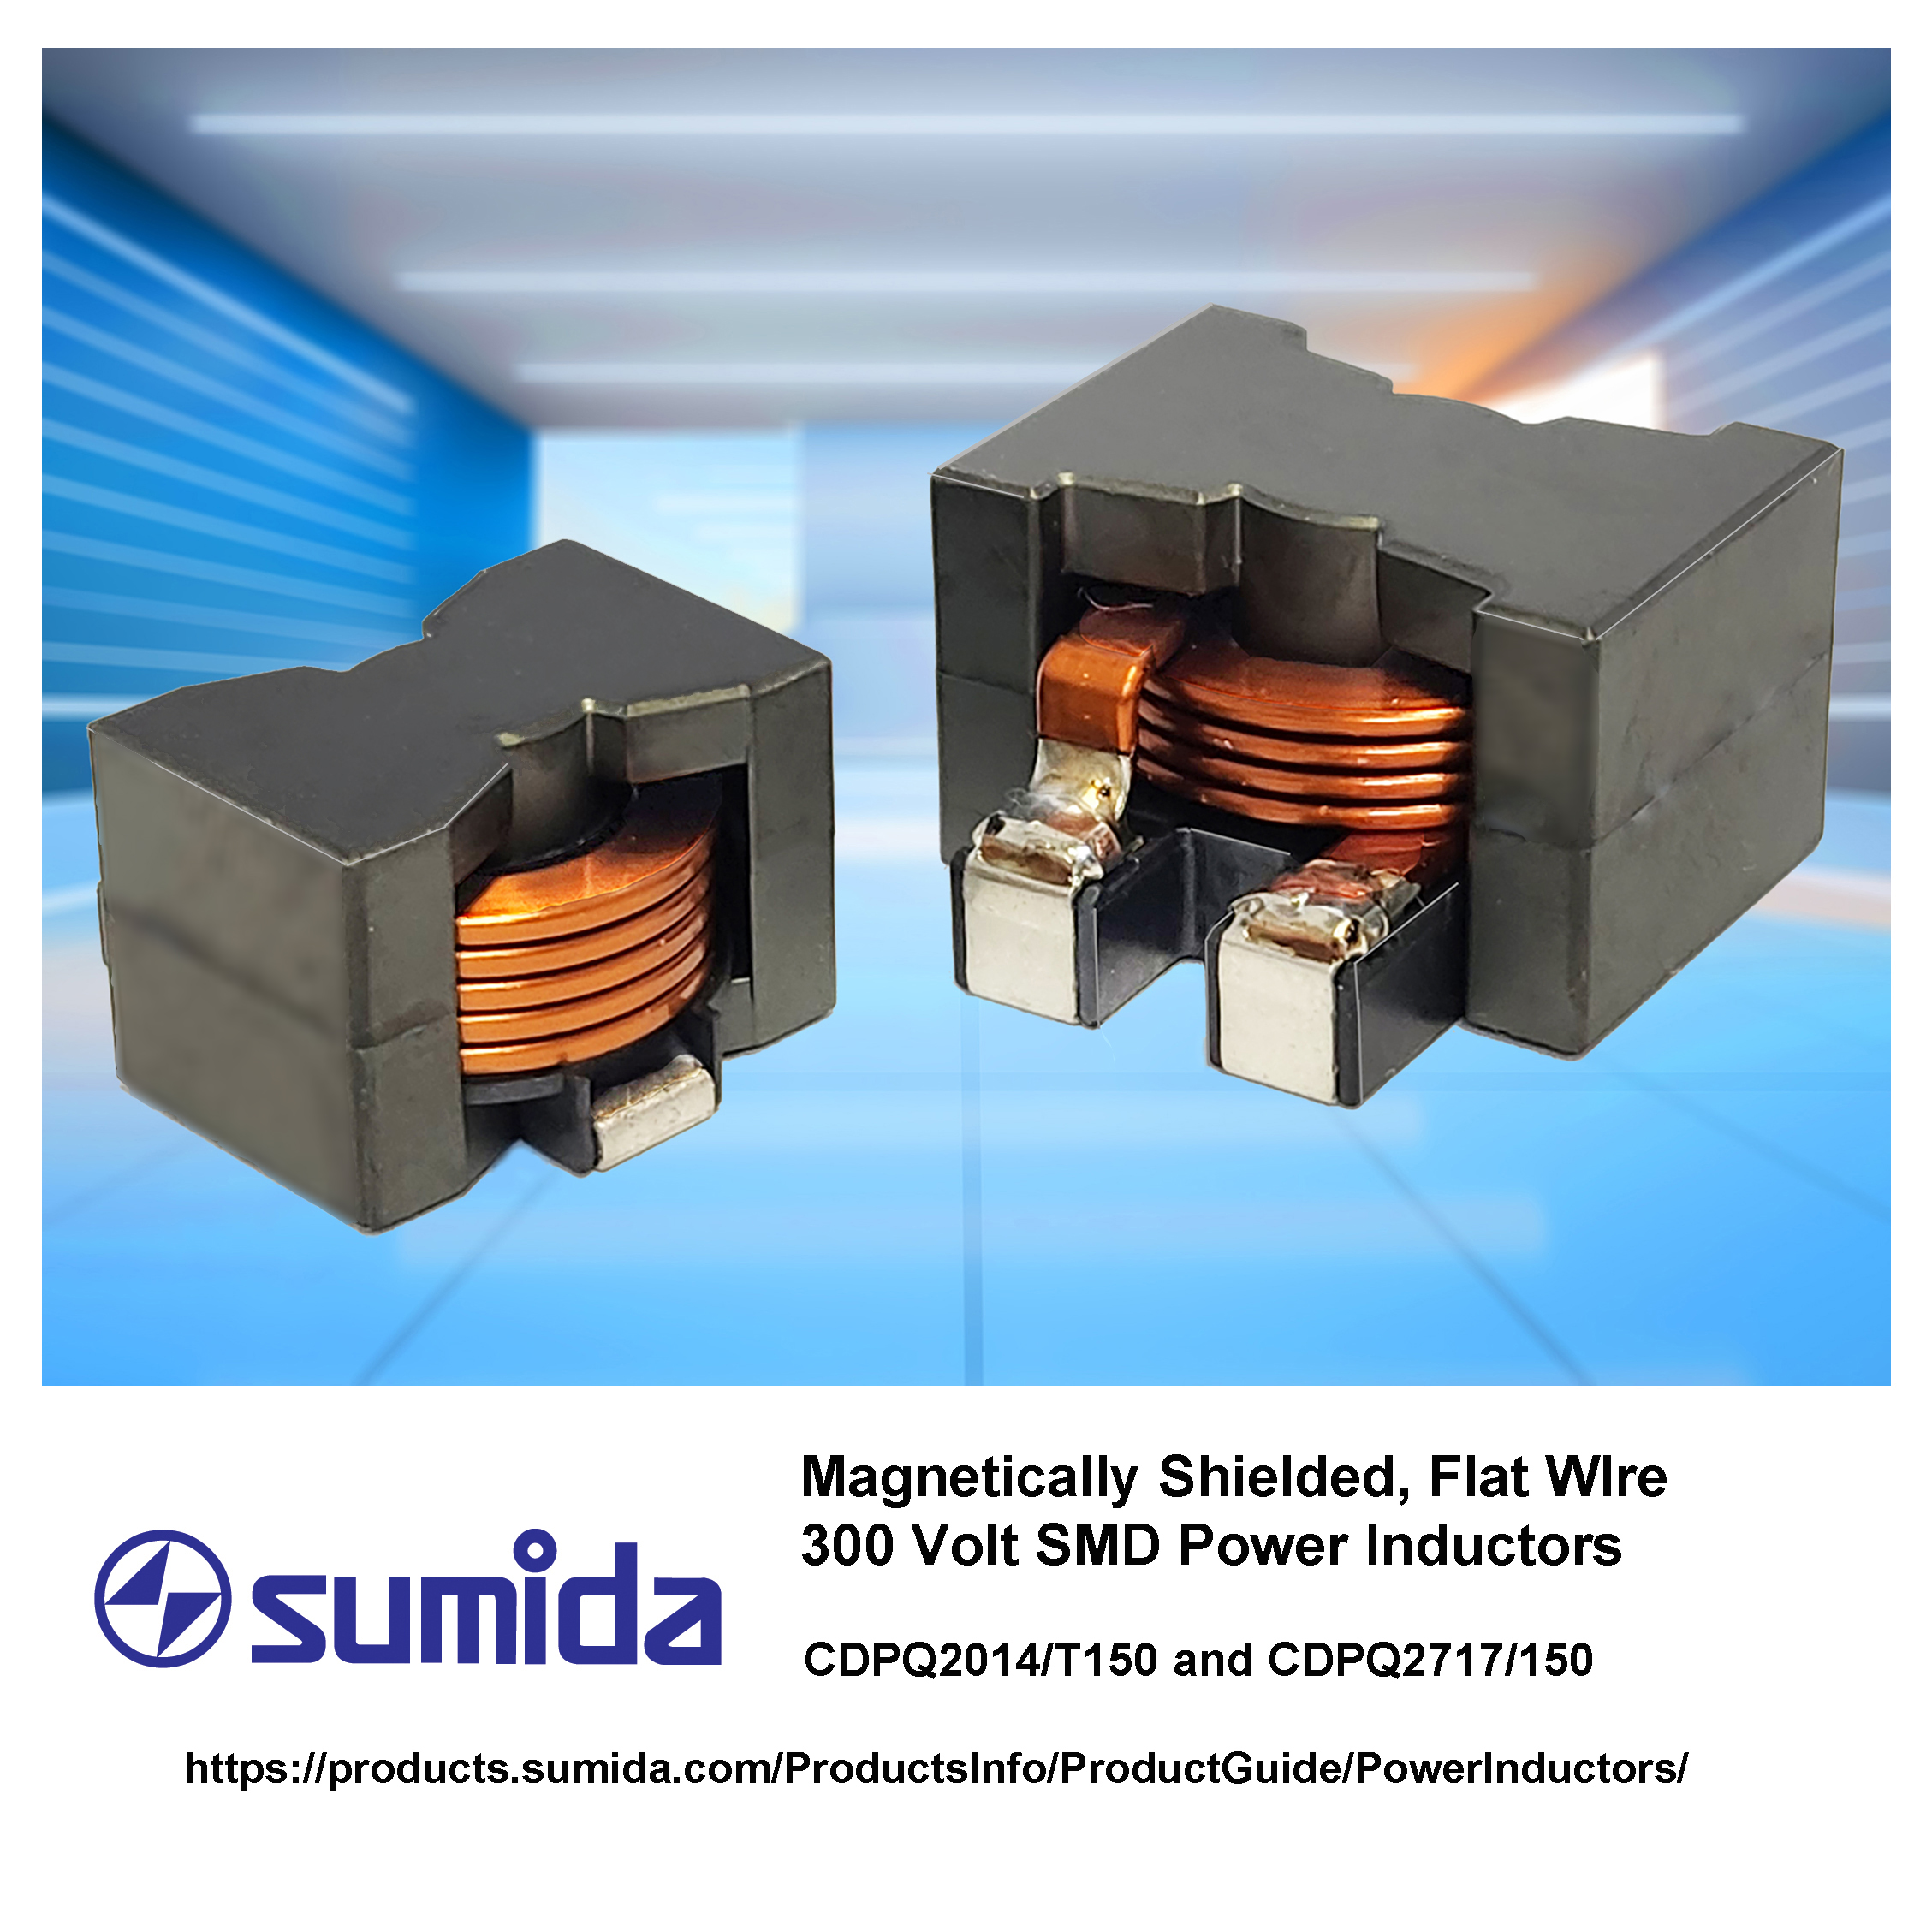 Sumida Announces SMD High-Current Power Inductors for On-Board Chargers